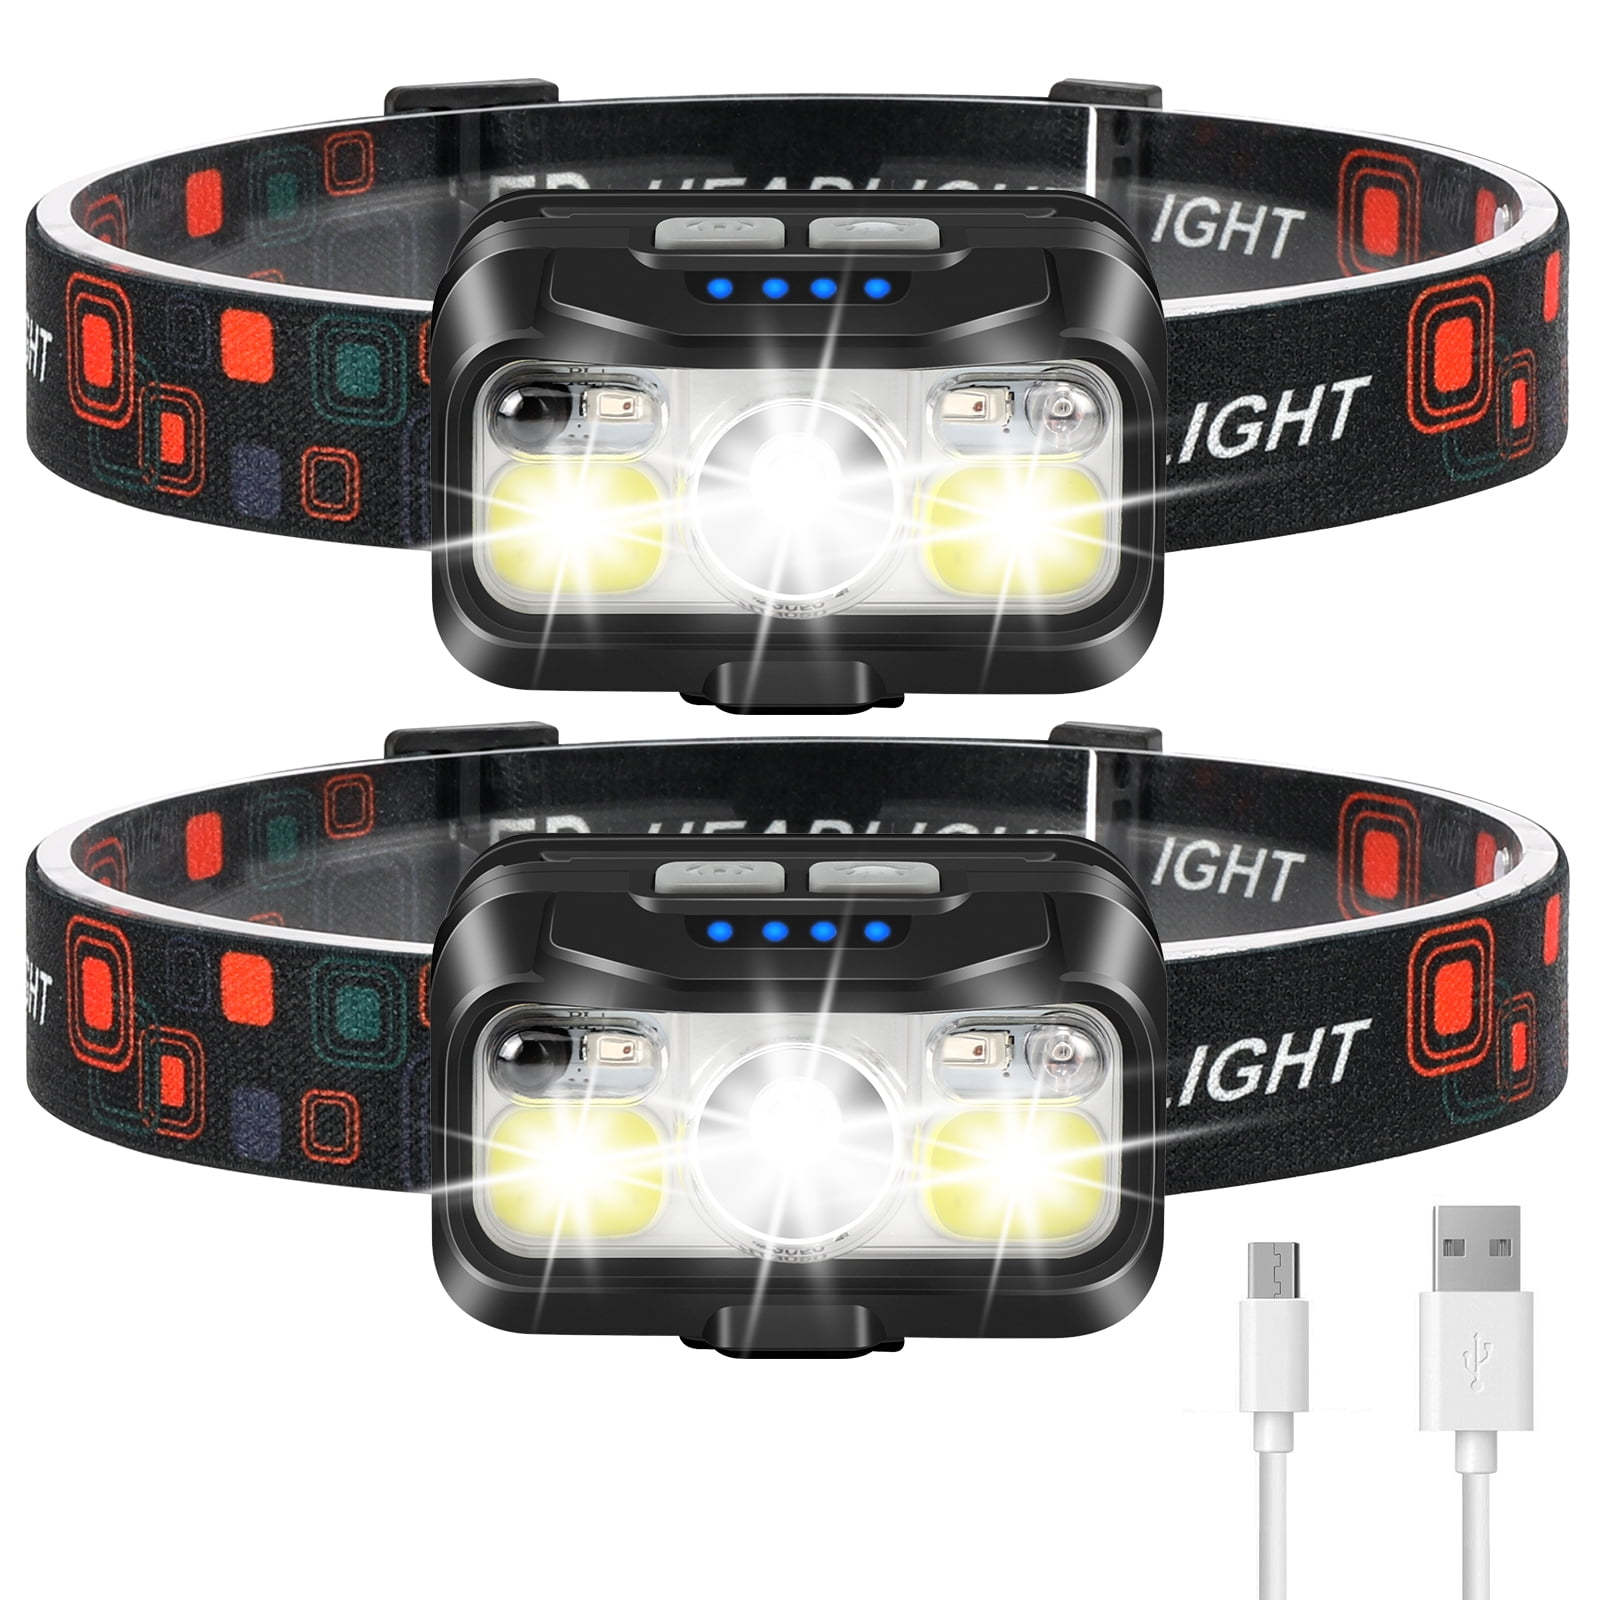 head lamps for adults Foxdott 8 LED Headlamp Flashlight with White Red Lights,8 Modes USB Rechargeable Waterproof Head Lamp for Outdoor Camping Cycling Running Fishing Rechargeable Headlamp